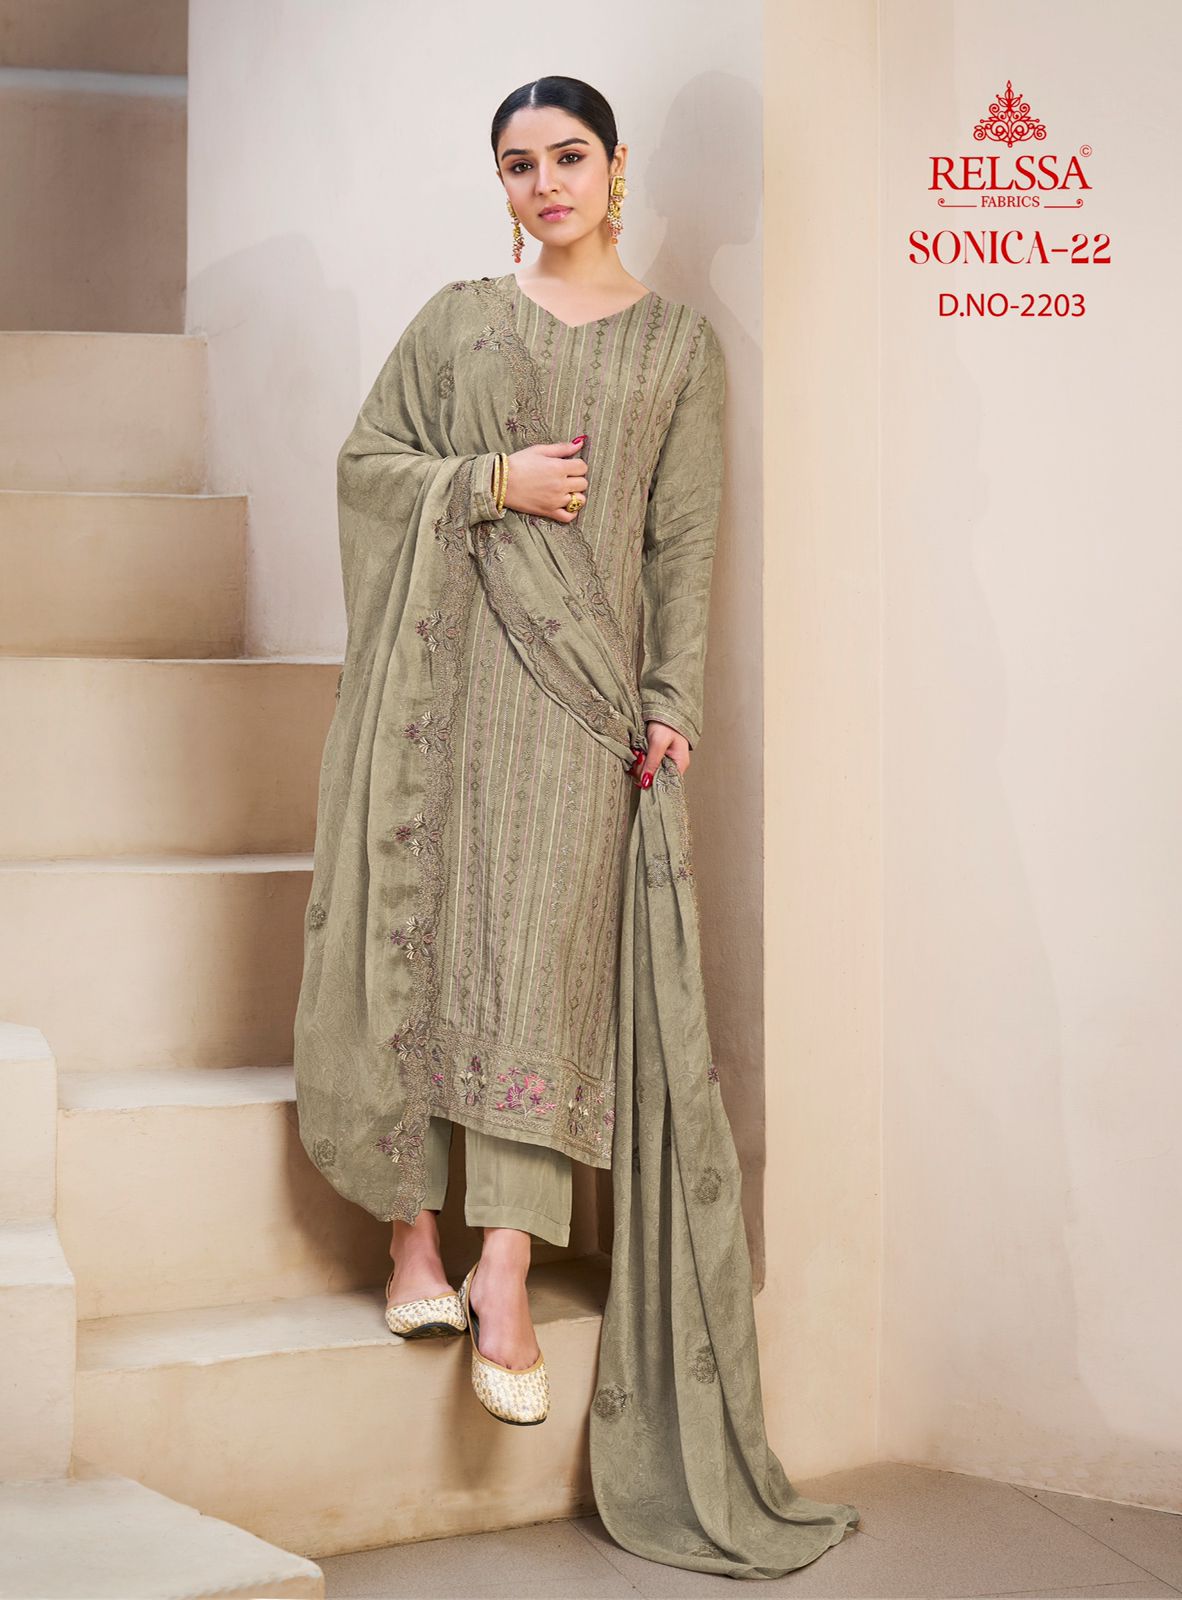 Sonica Vol 22 Relssa Fabrics Pure Muslin Pant Style Suits